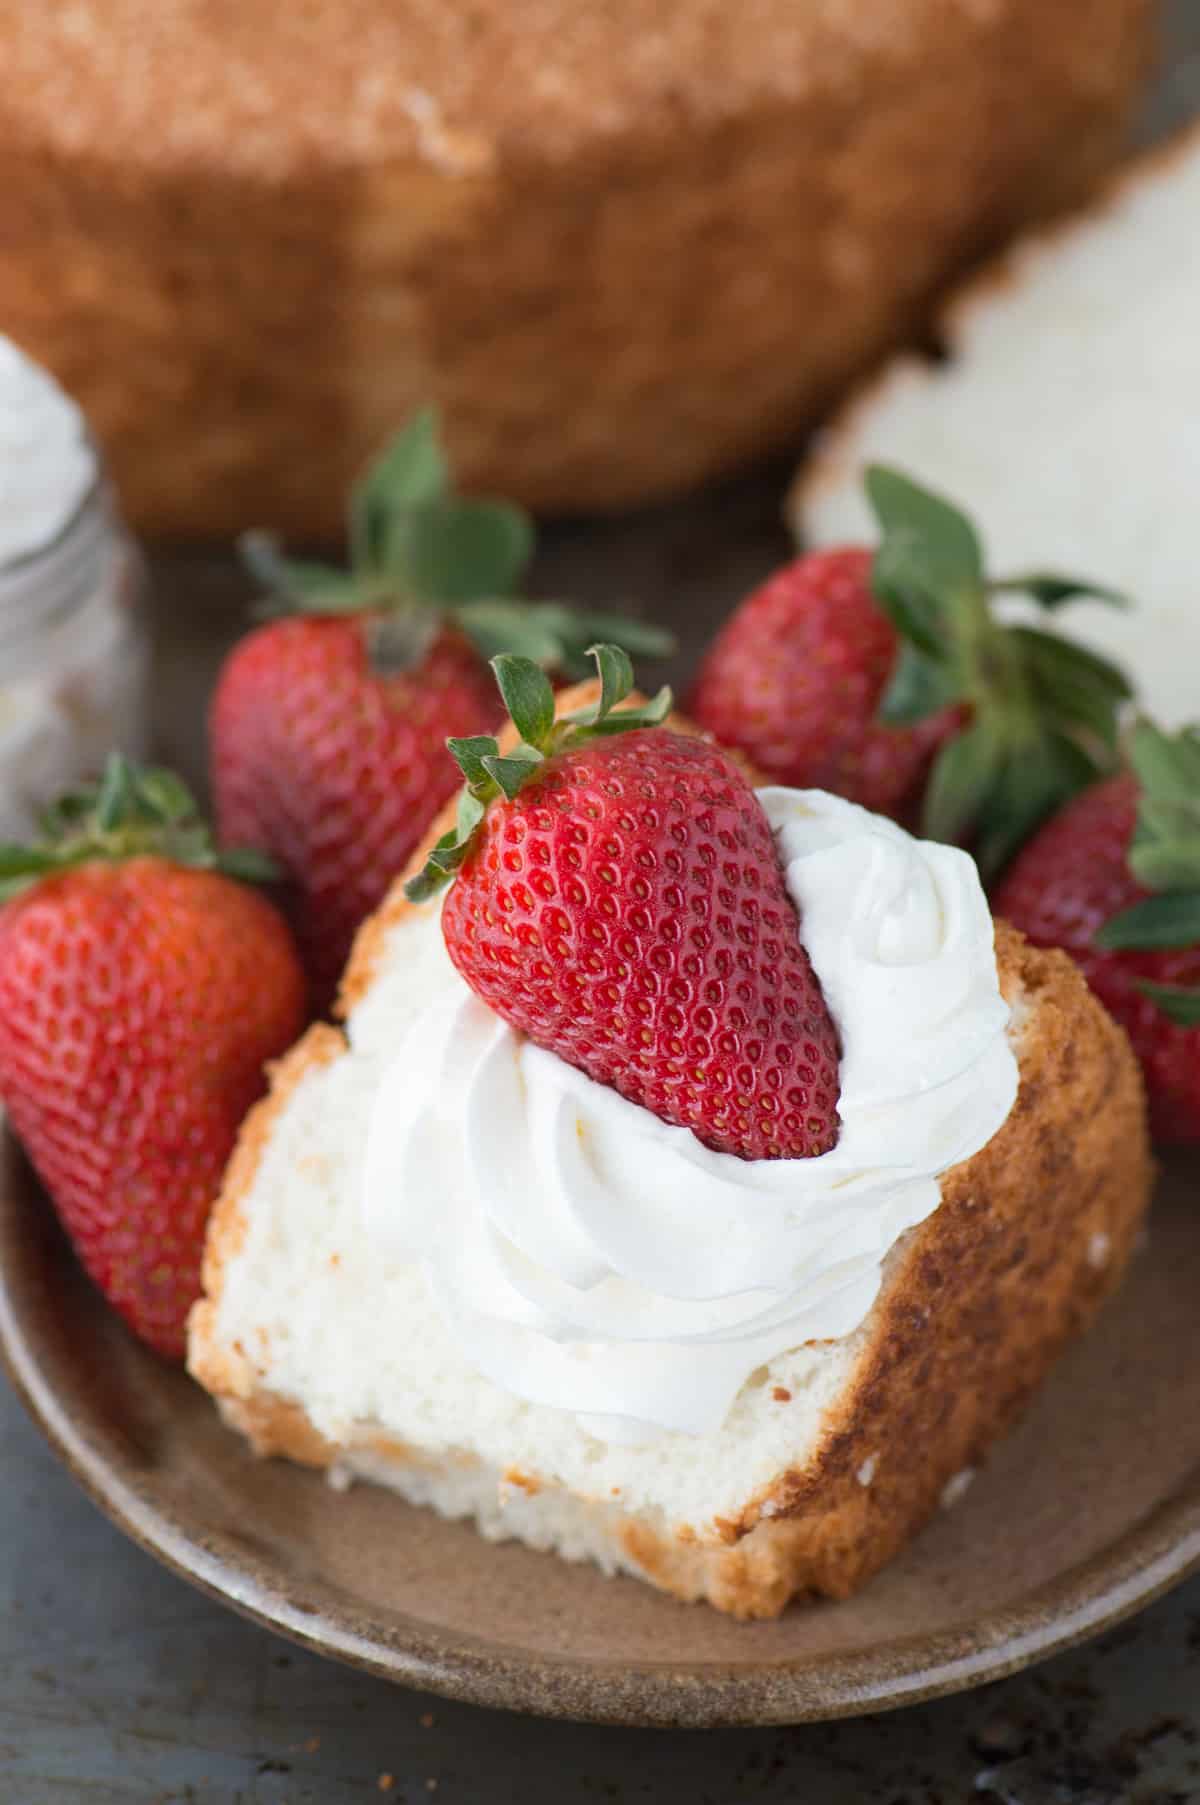 100% homemade angel food cake! This is the recipe that everyone will ask you for! This recipe shows you how to use all purpose flour instead of cake flour, and you can easily make it gluten free!